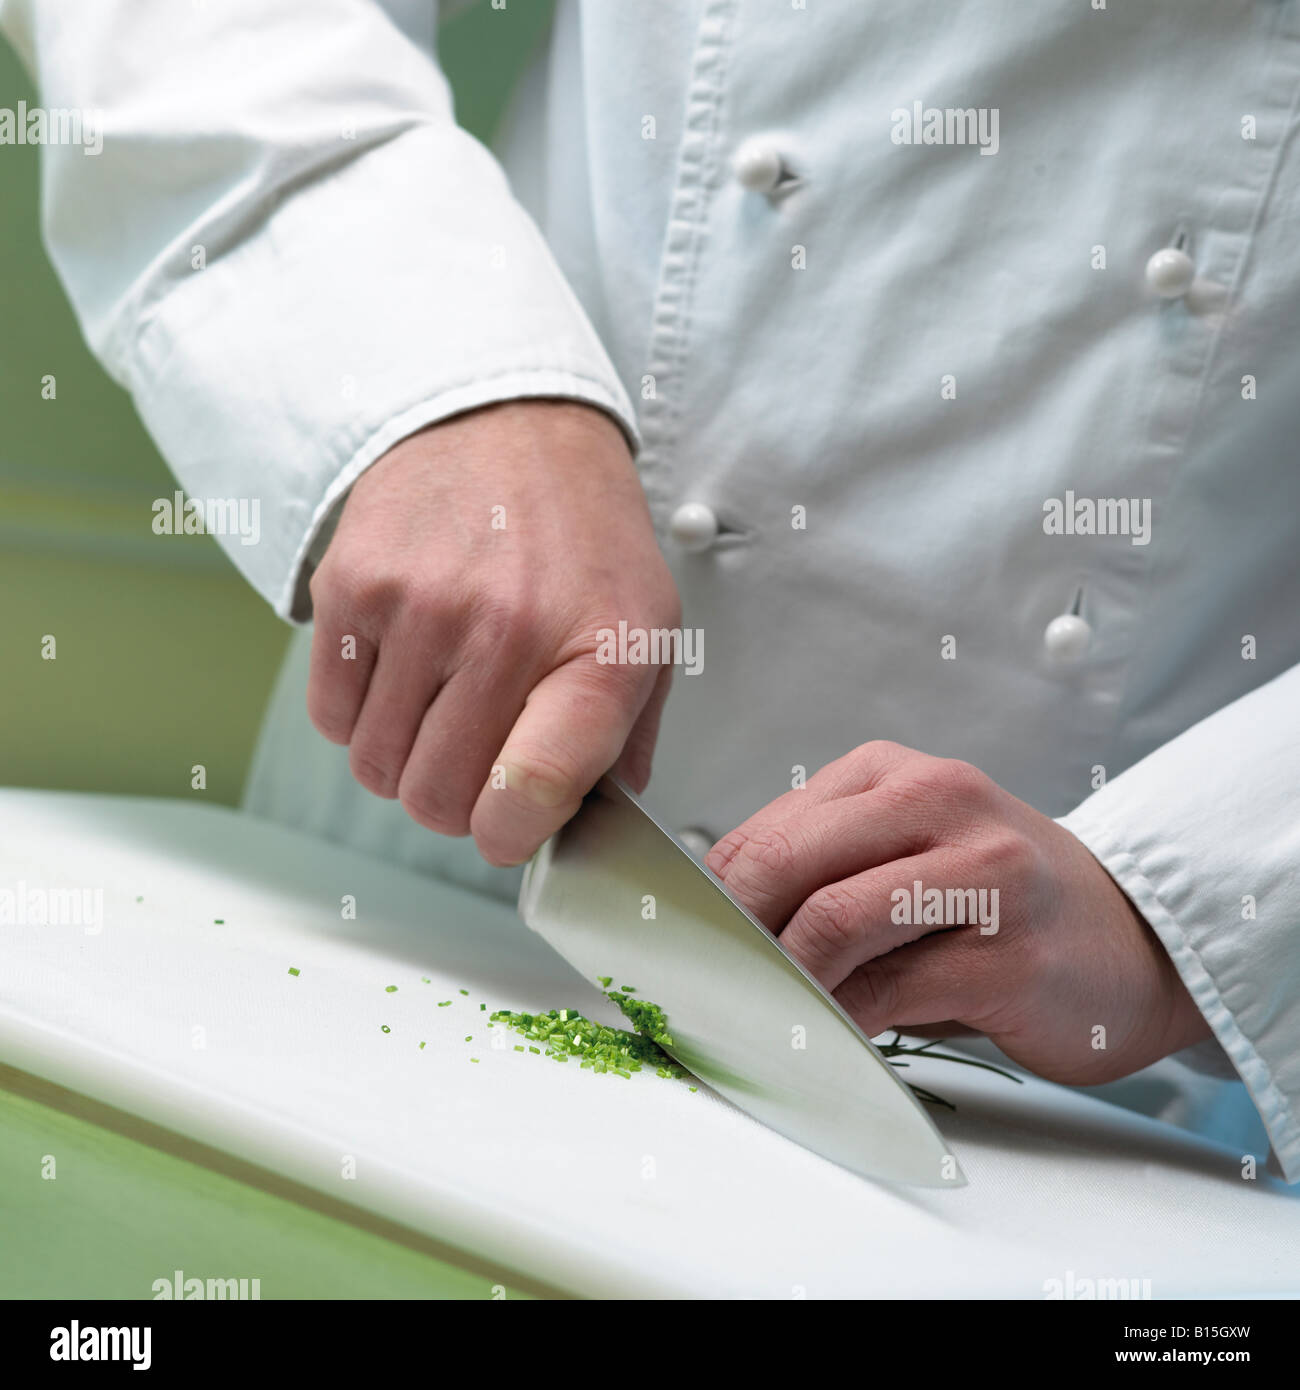 cook is cutting parsley close up hands and knife Stock Photo